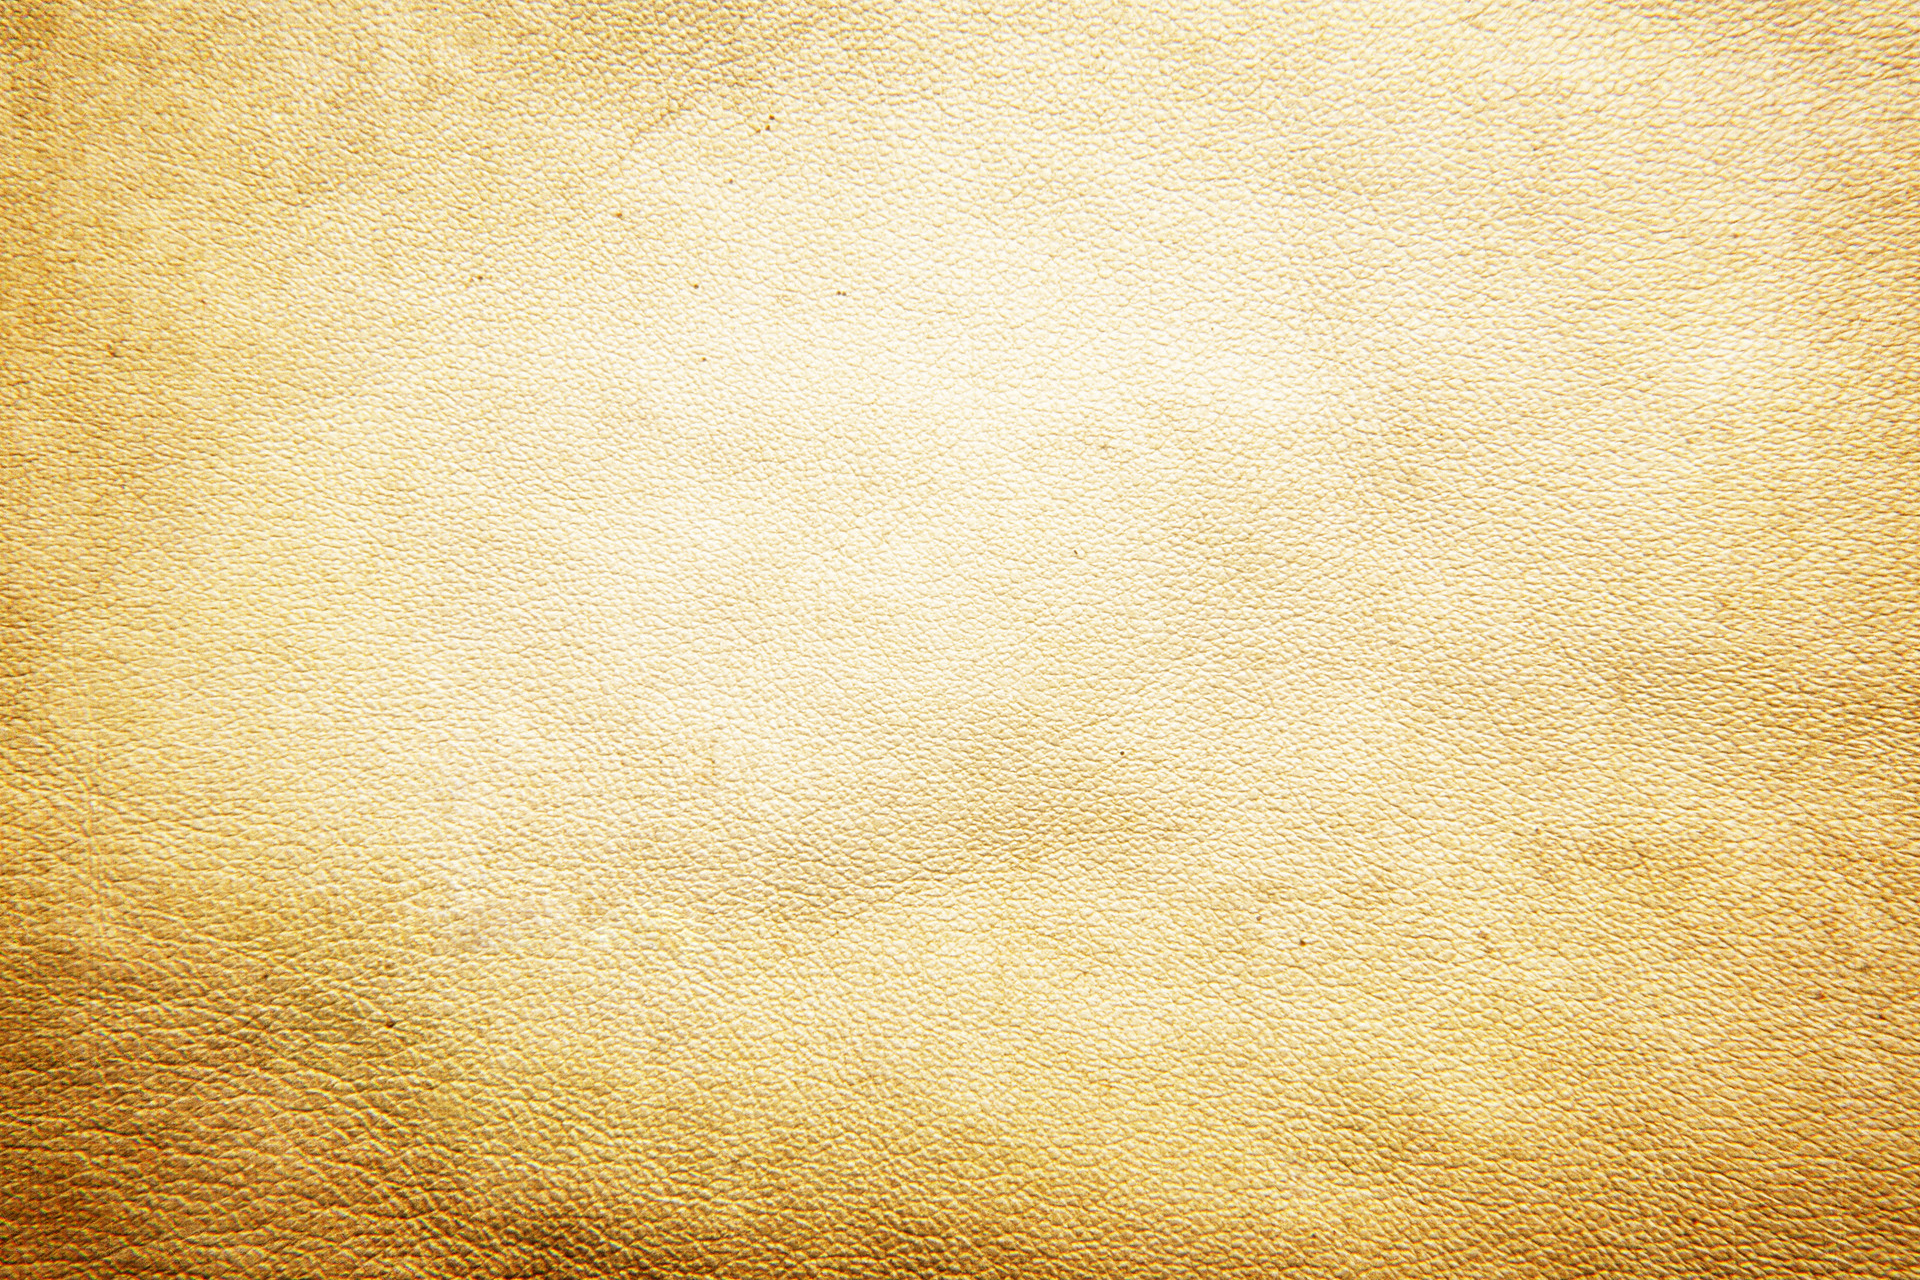 HD Texture Backgrounds (76+ images)